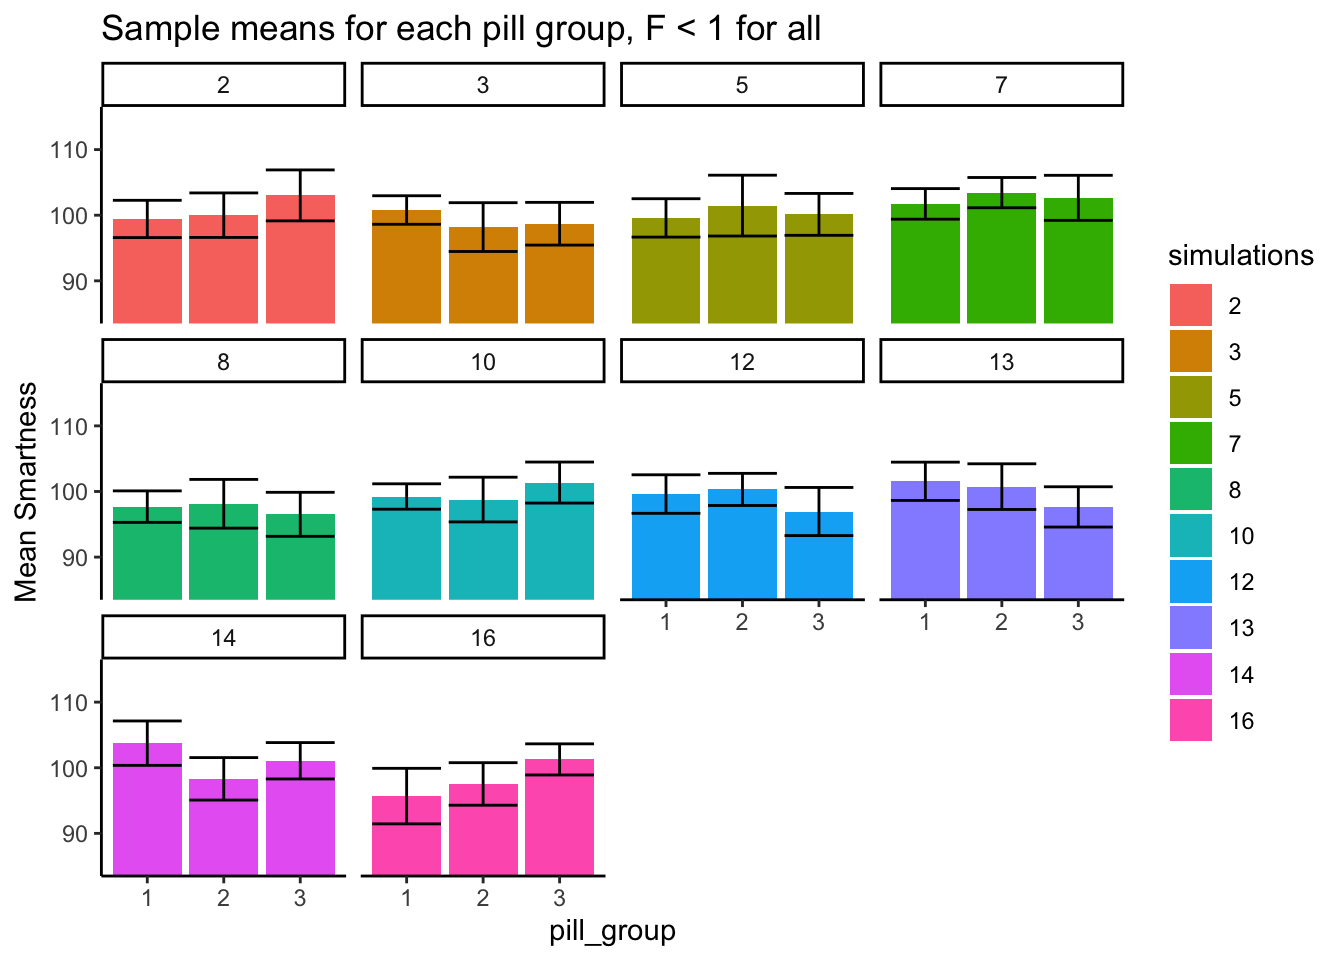 Different patterns of group means under the null (sampled from same distribution) when F is less than 1